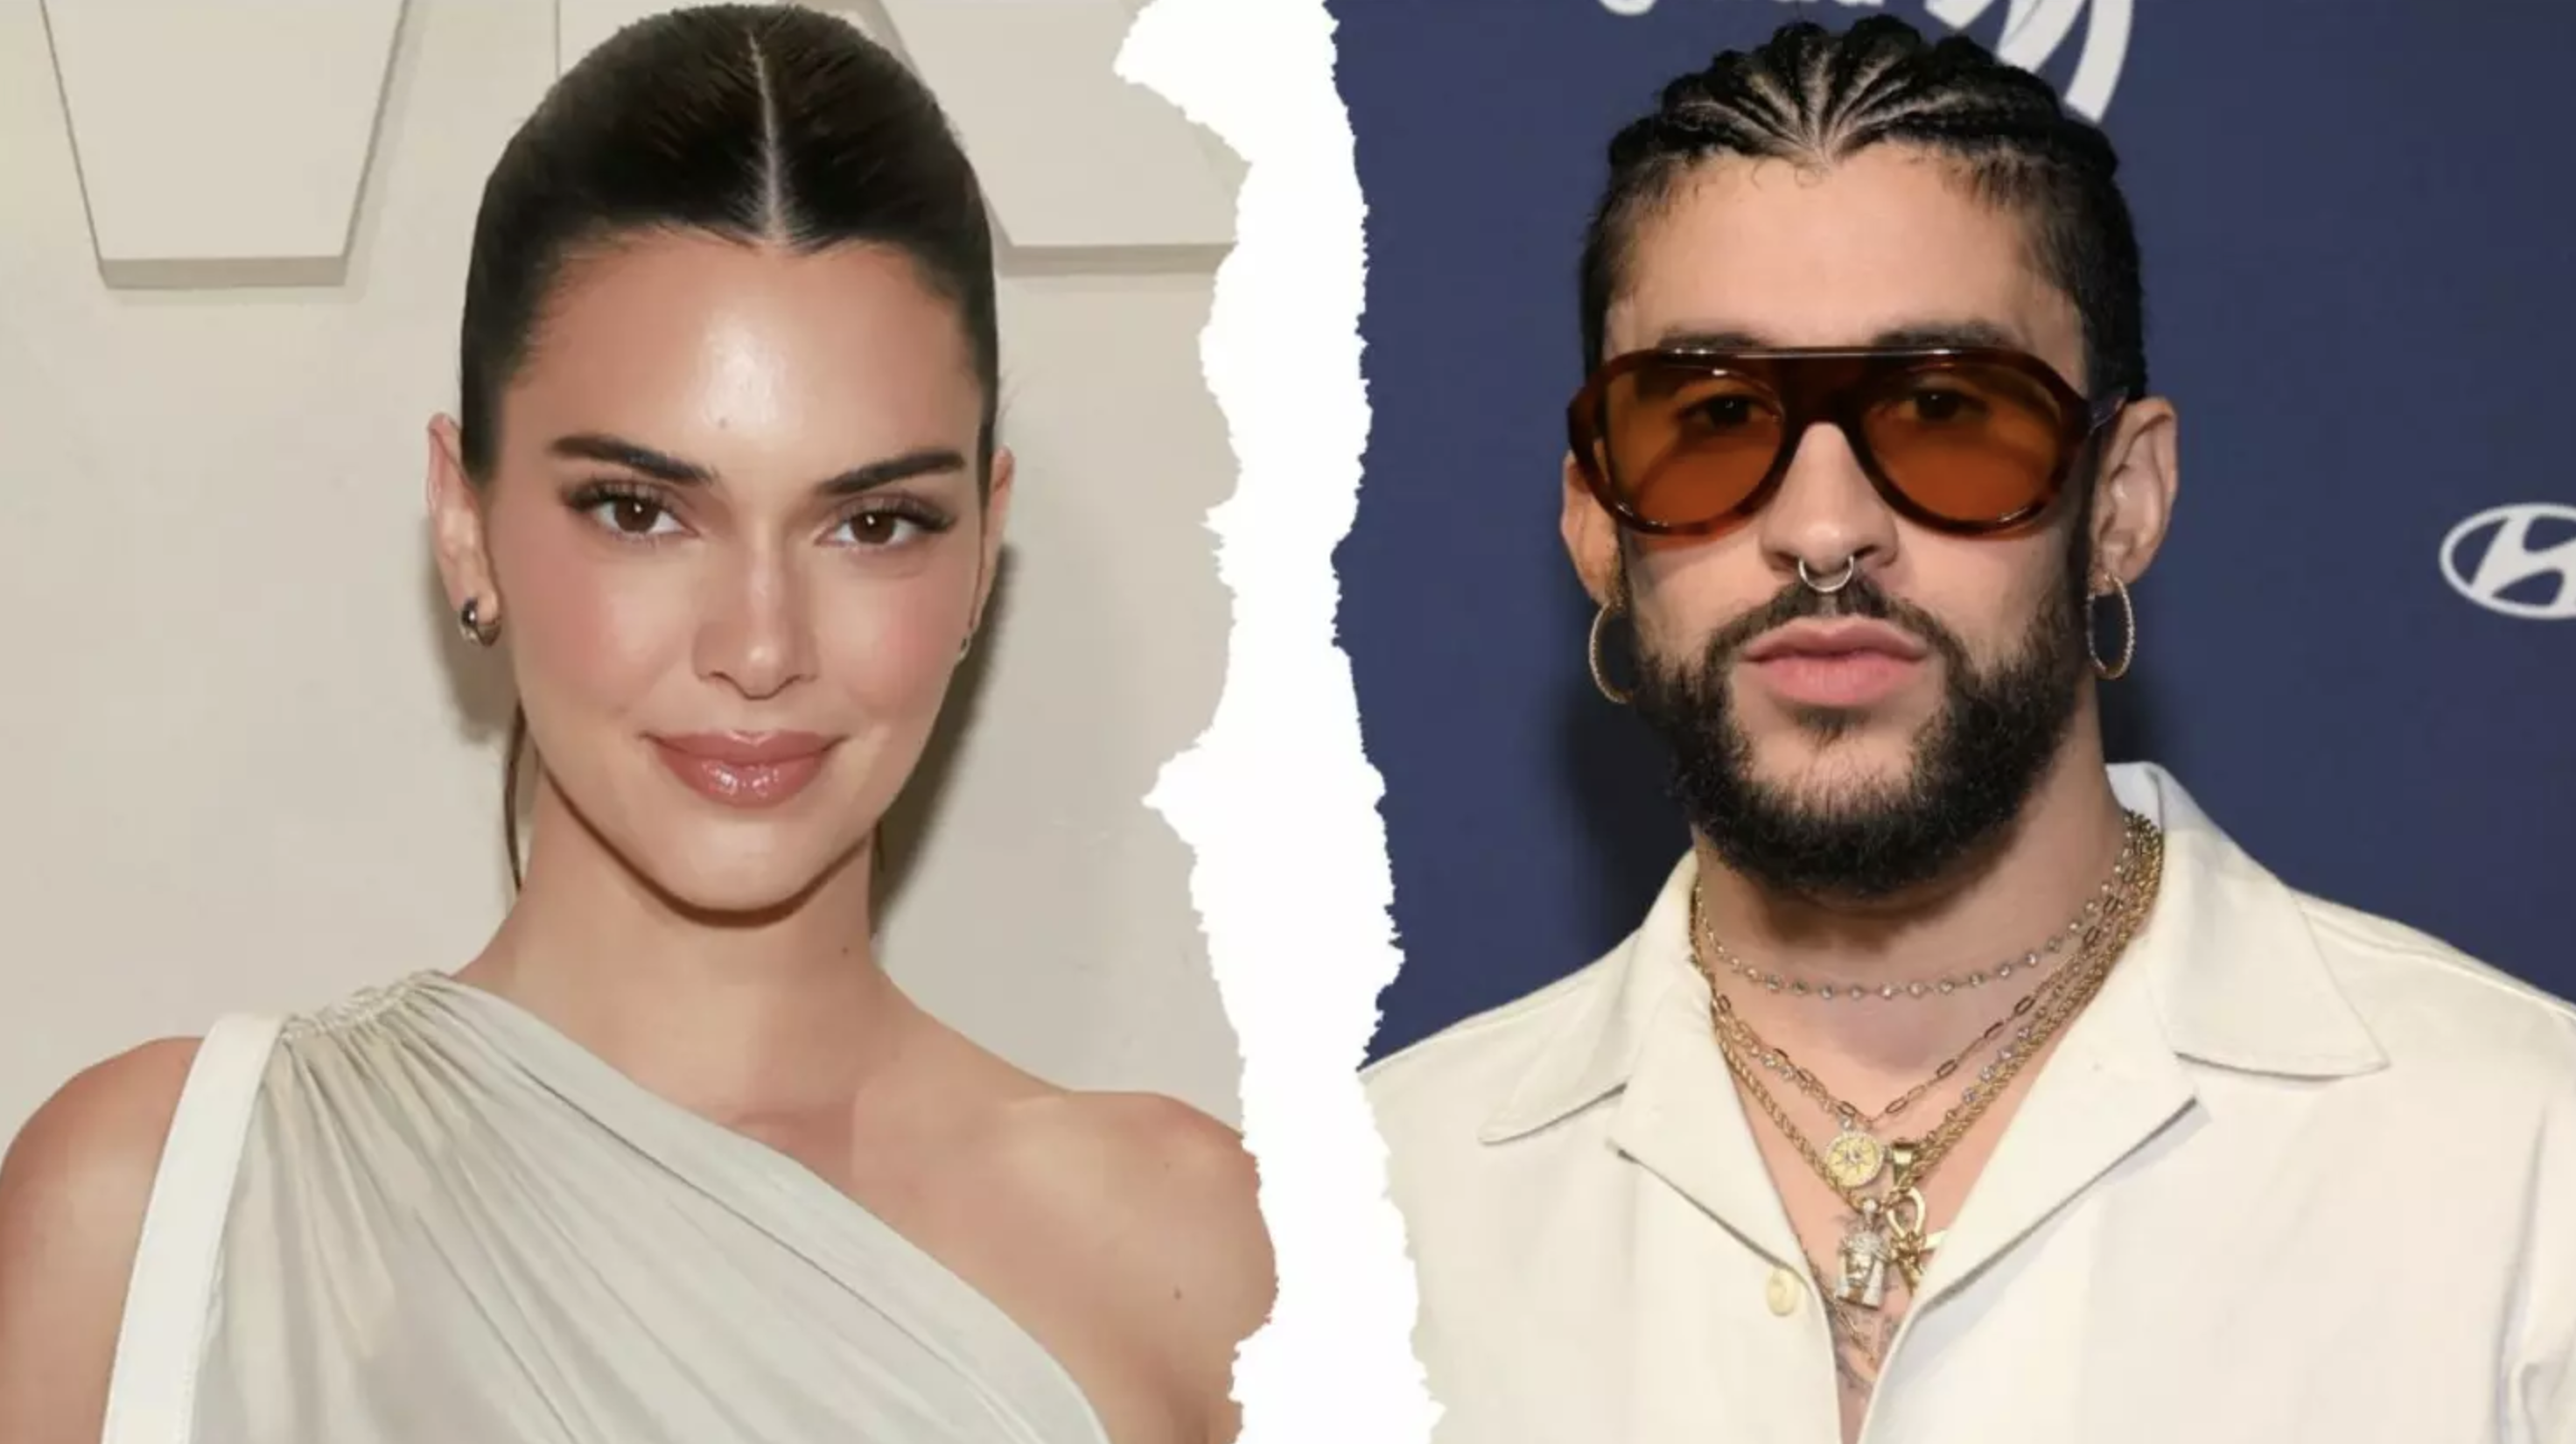 Bad Bunny & Kendall Jenner Break Up After Less Than A Year Together